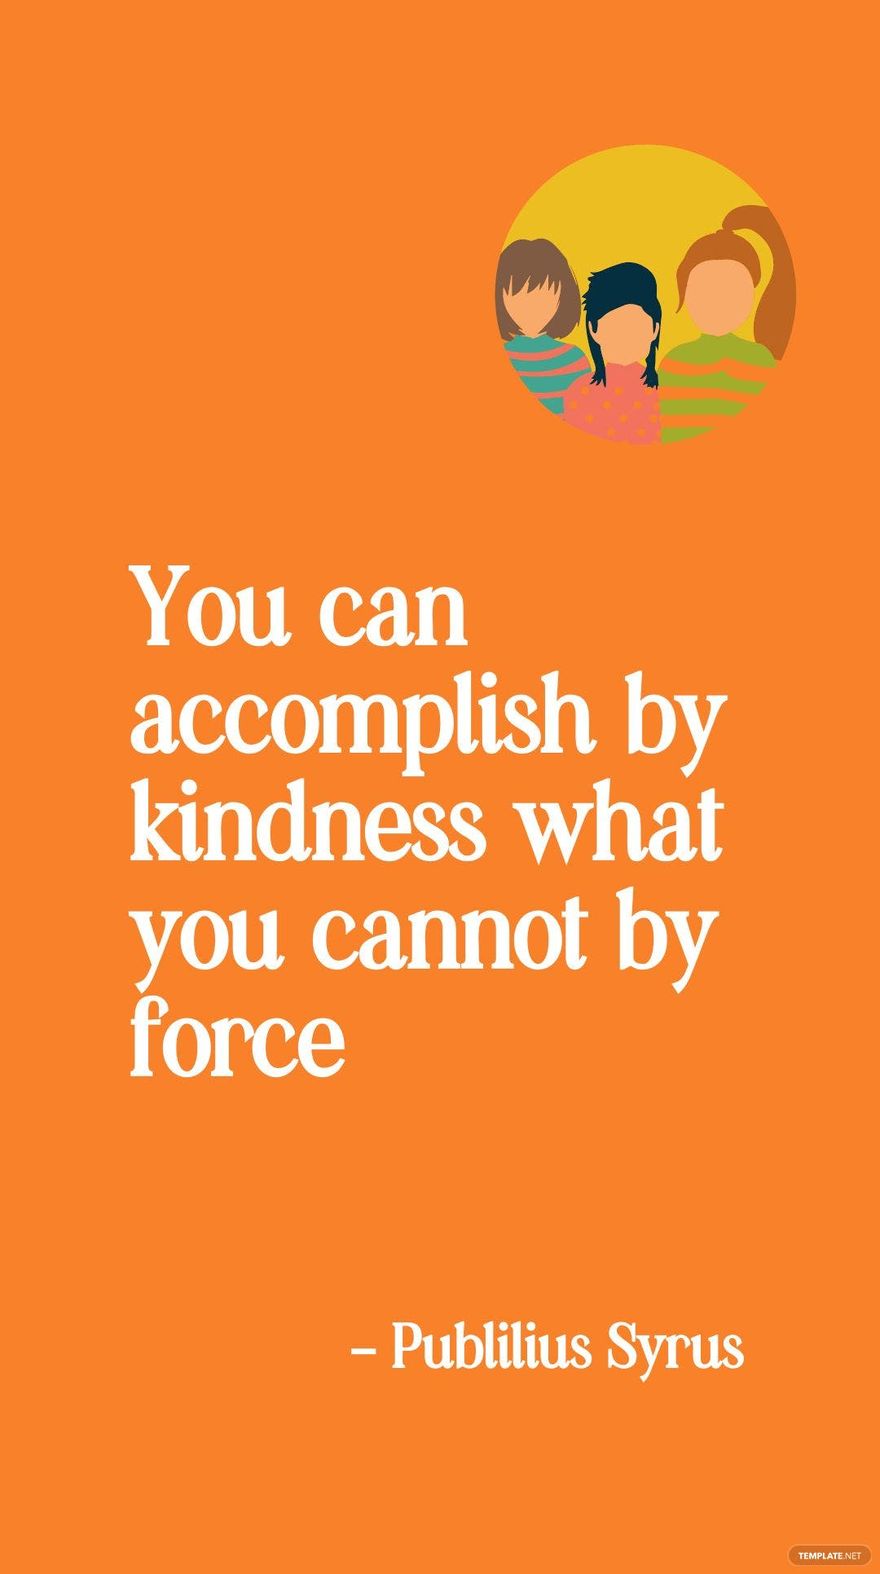 Free Publilius Syrus - You can accomplish by kindness what you cannot by force in JPG